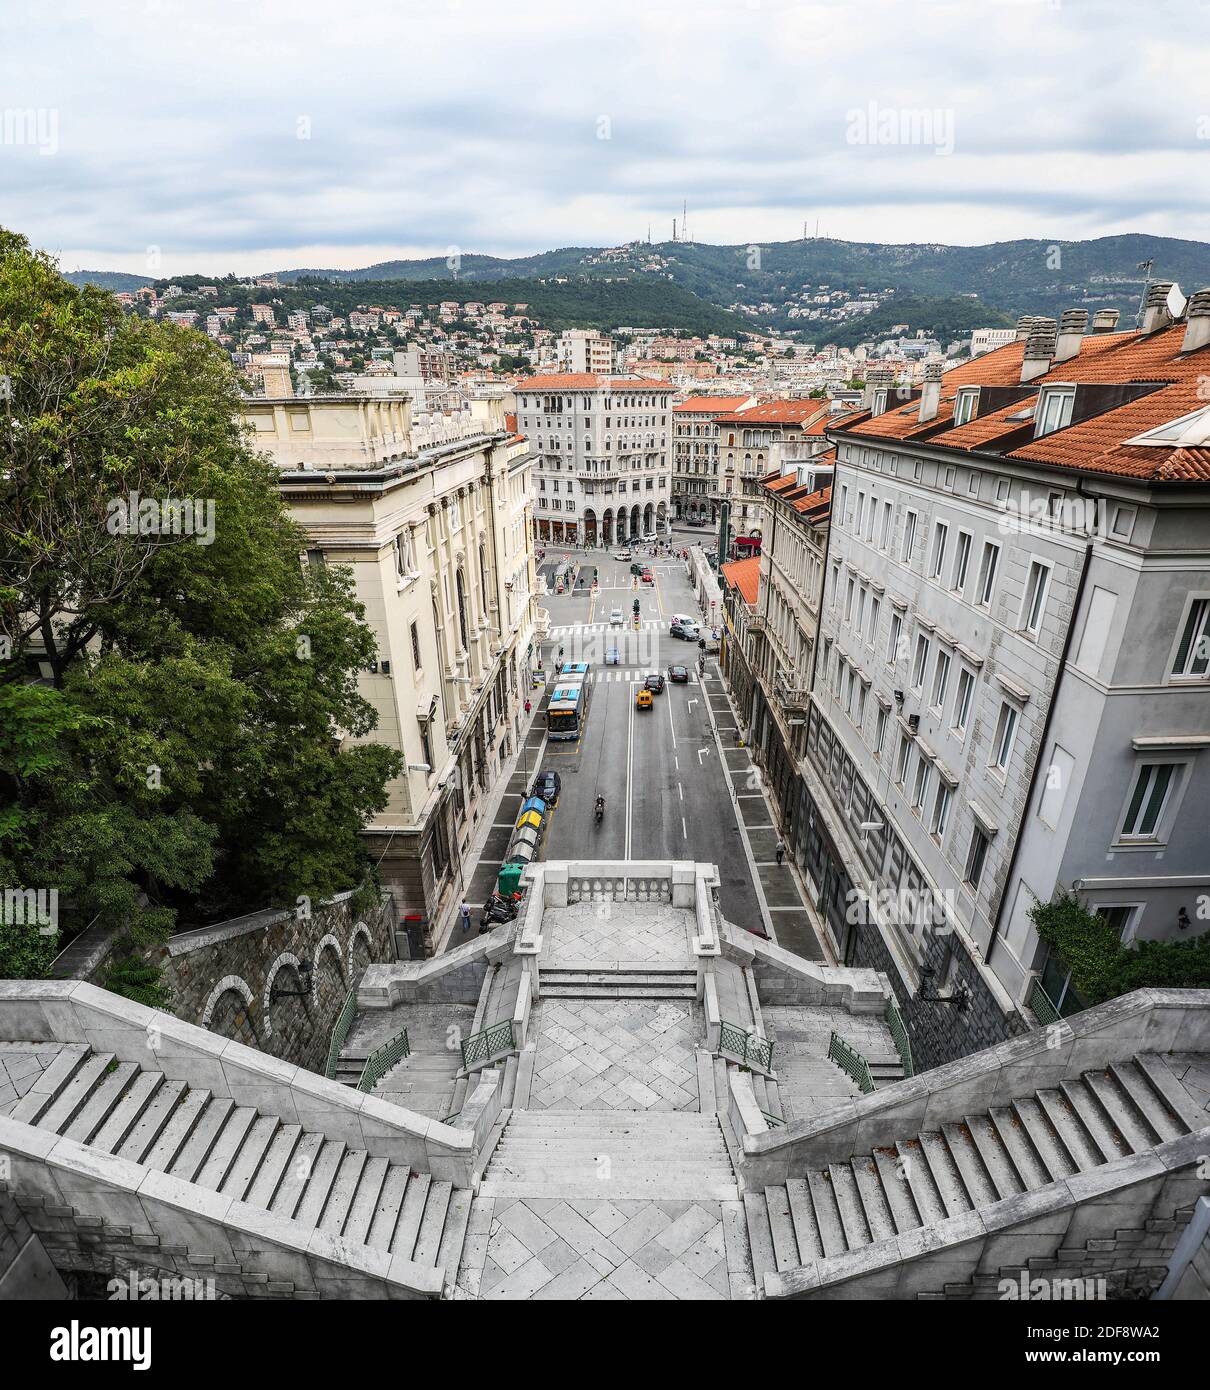 Trieste seen from the top of the Scala dei Giganti with a view of Piazza Goldoni Stock Photo